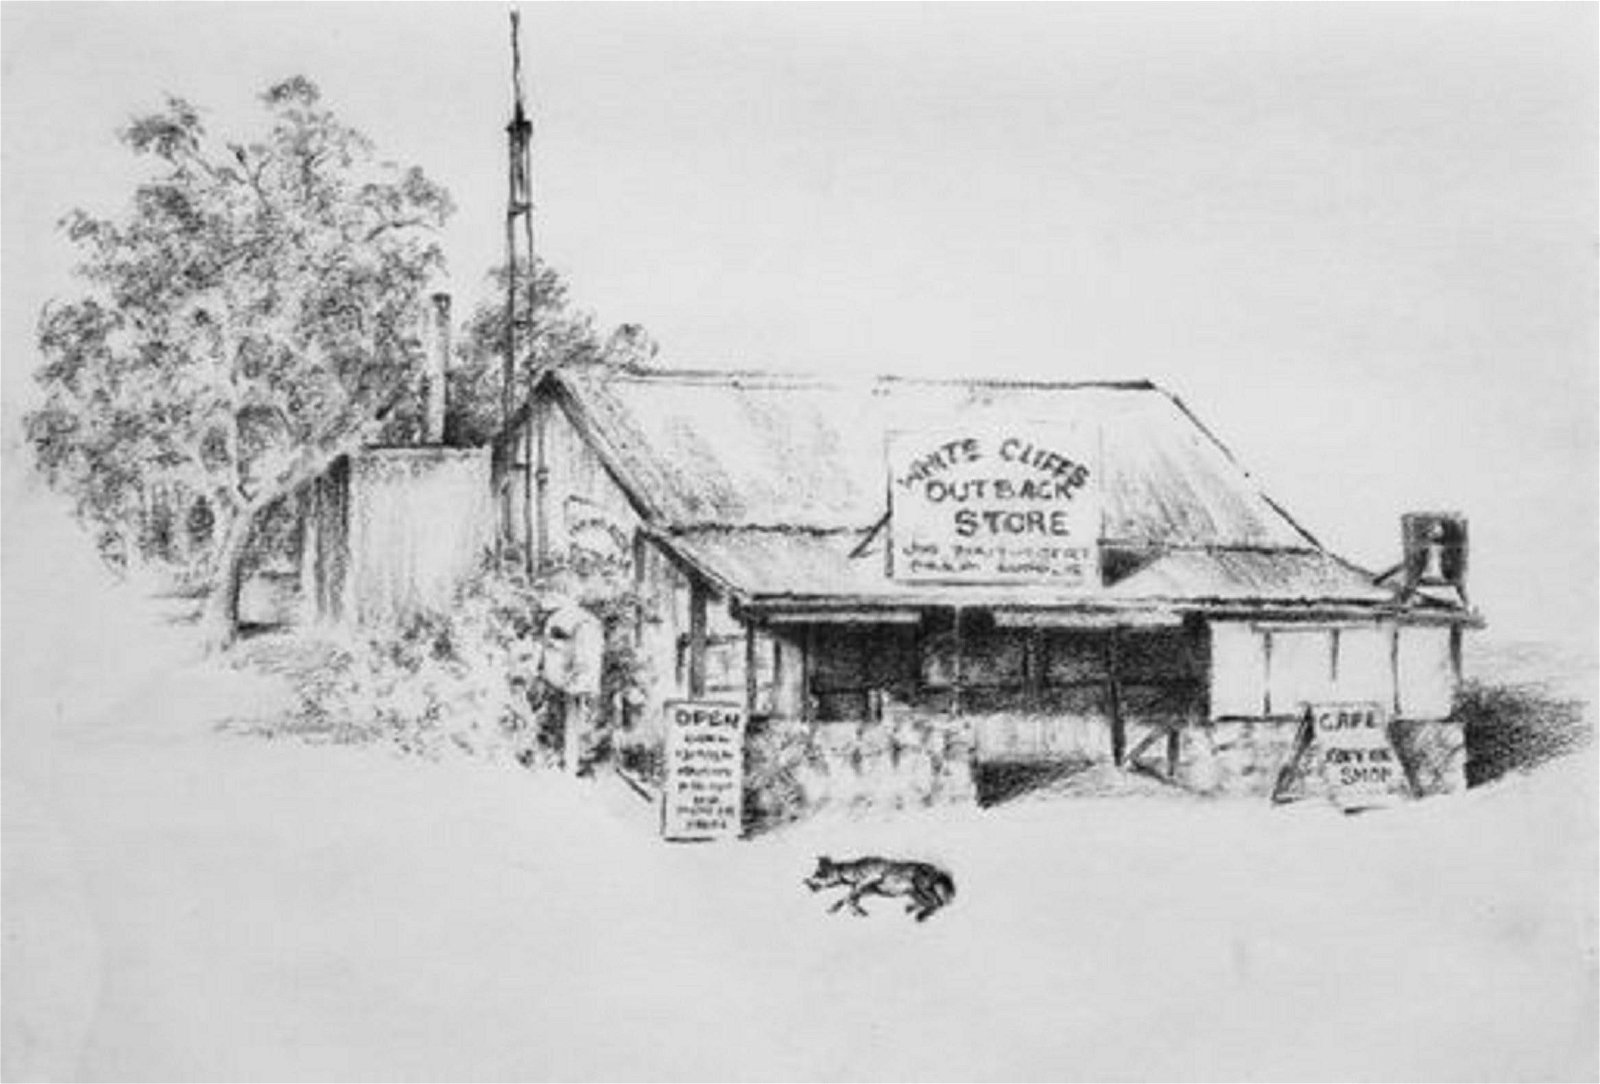 White Cliffs Outback Store